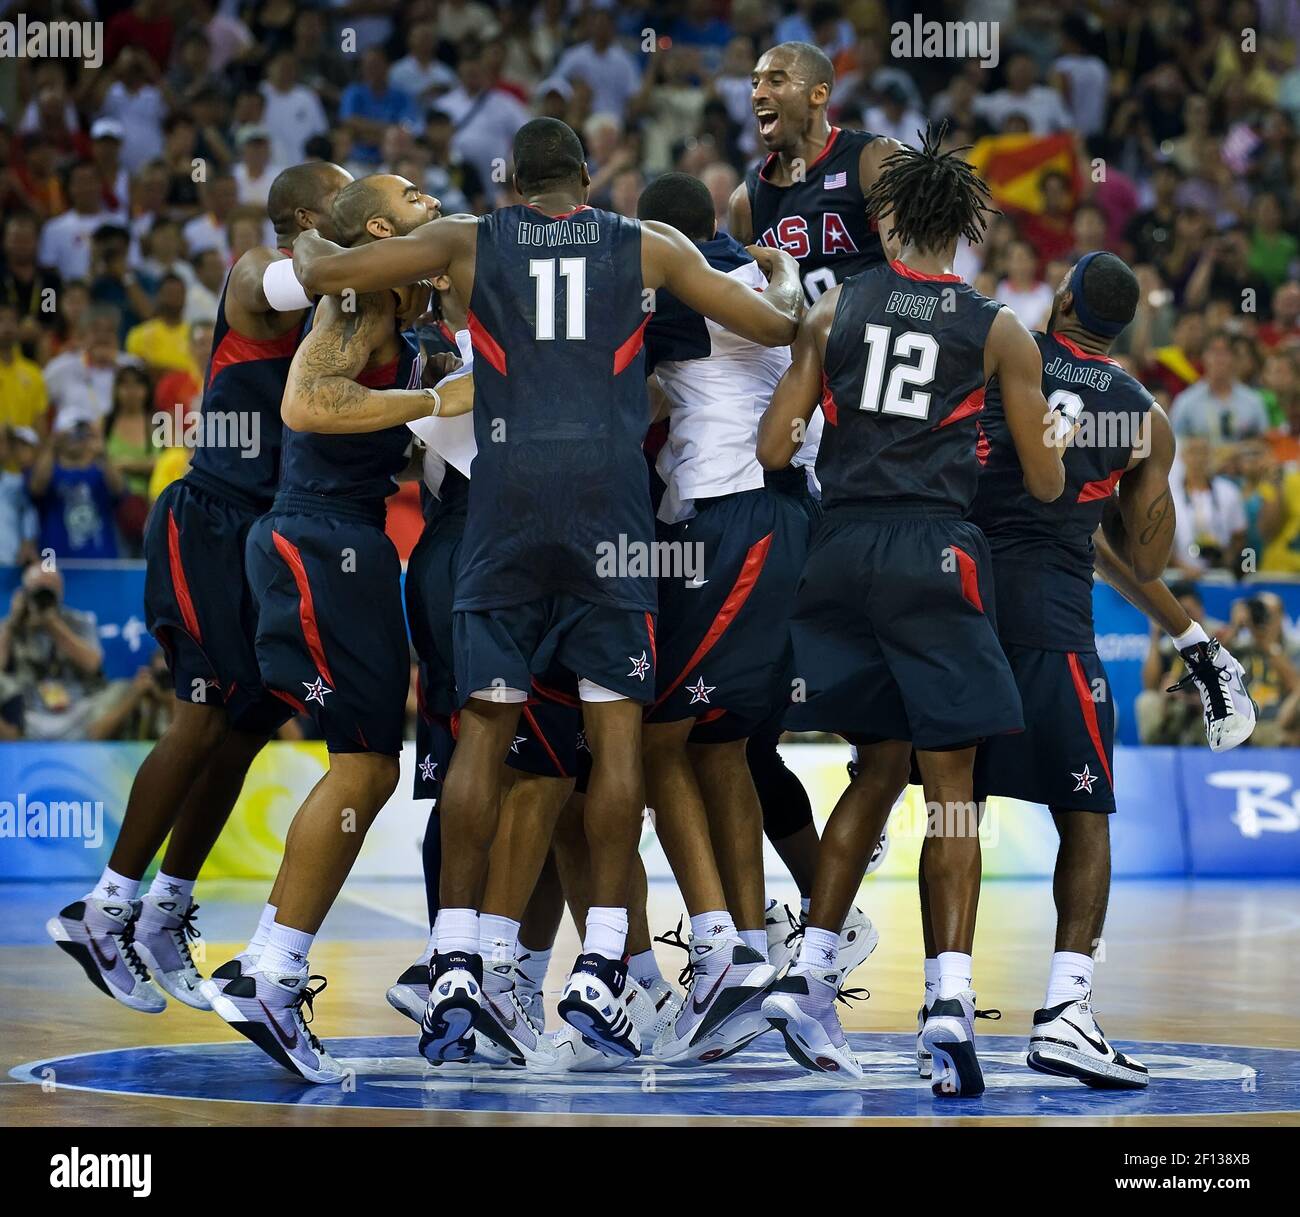 Members Of The United States Men S Basketball Team Celebrate Defeating Spain In The Gold Medal Game On Sunday August 24 08 In The Games Of The Xxix Olympiad In Beijing China Photo